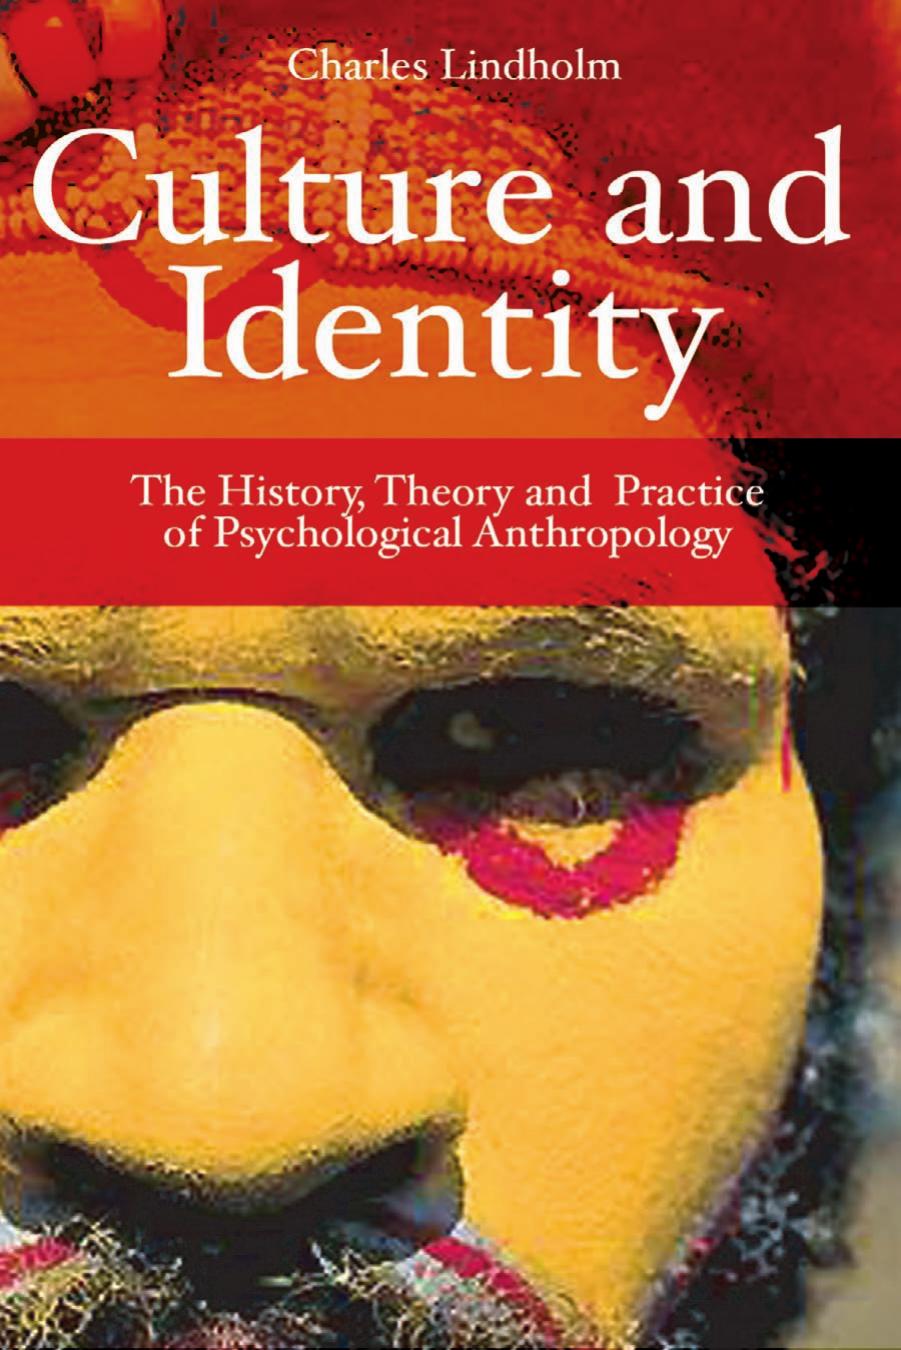 Culture and Identity: The History, Theory and Practice of Psychological Anthropology